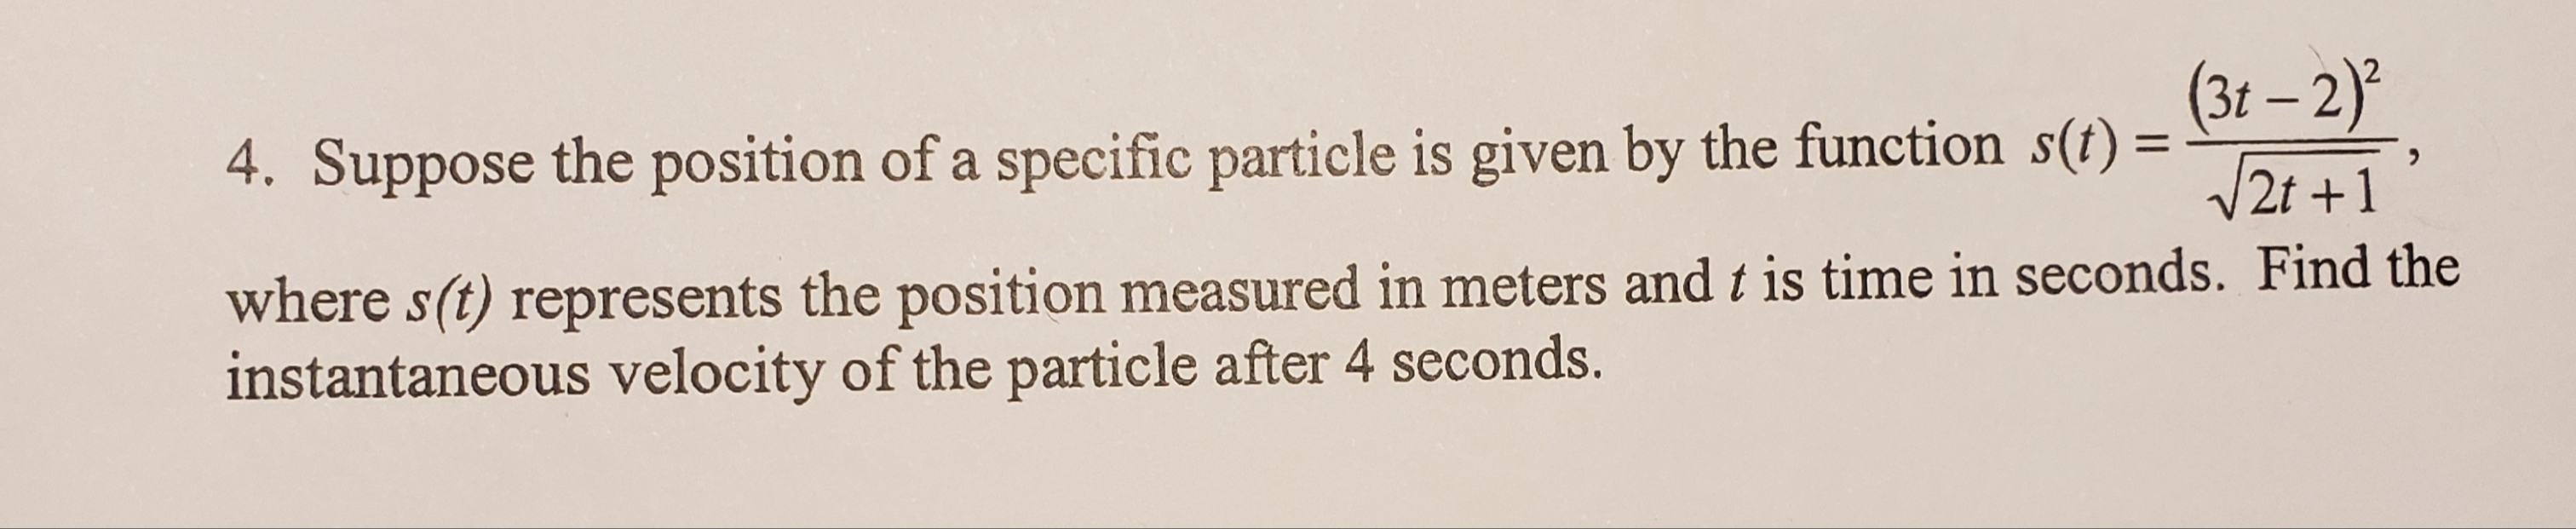 (31 – 2)
4. Suppose the position of a specific particle is given by the function s(t) =
/2t +1
where s(t) represents the position measured in meters and t is time in seconds. Find the
instantaneous velocity of the particle after 4 seconds.
